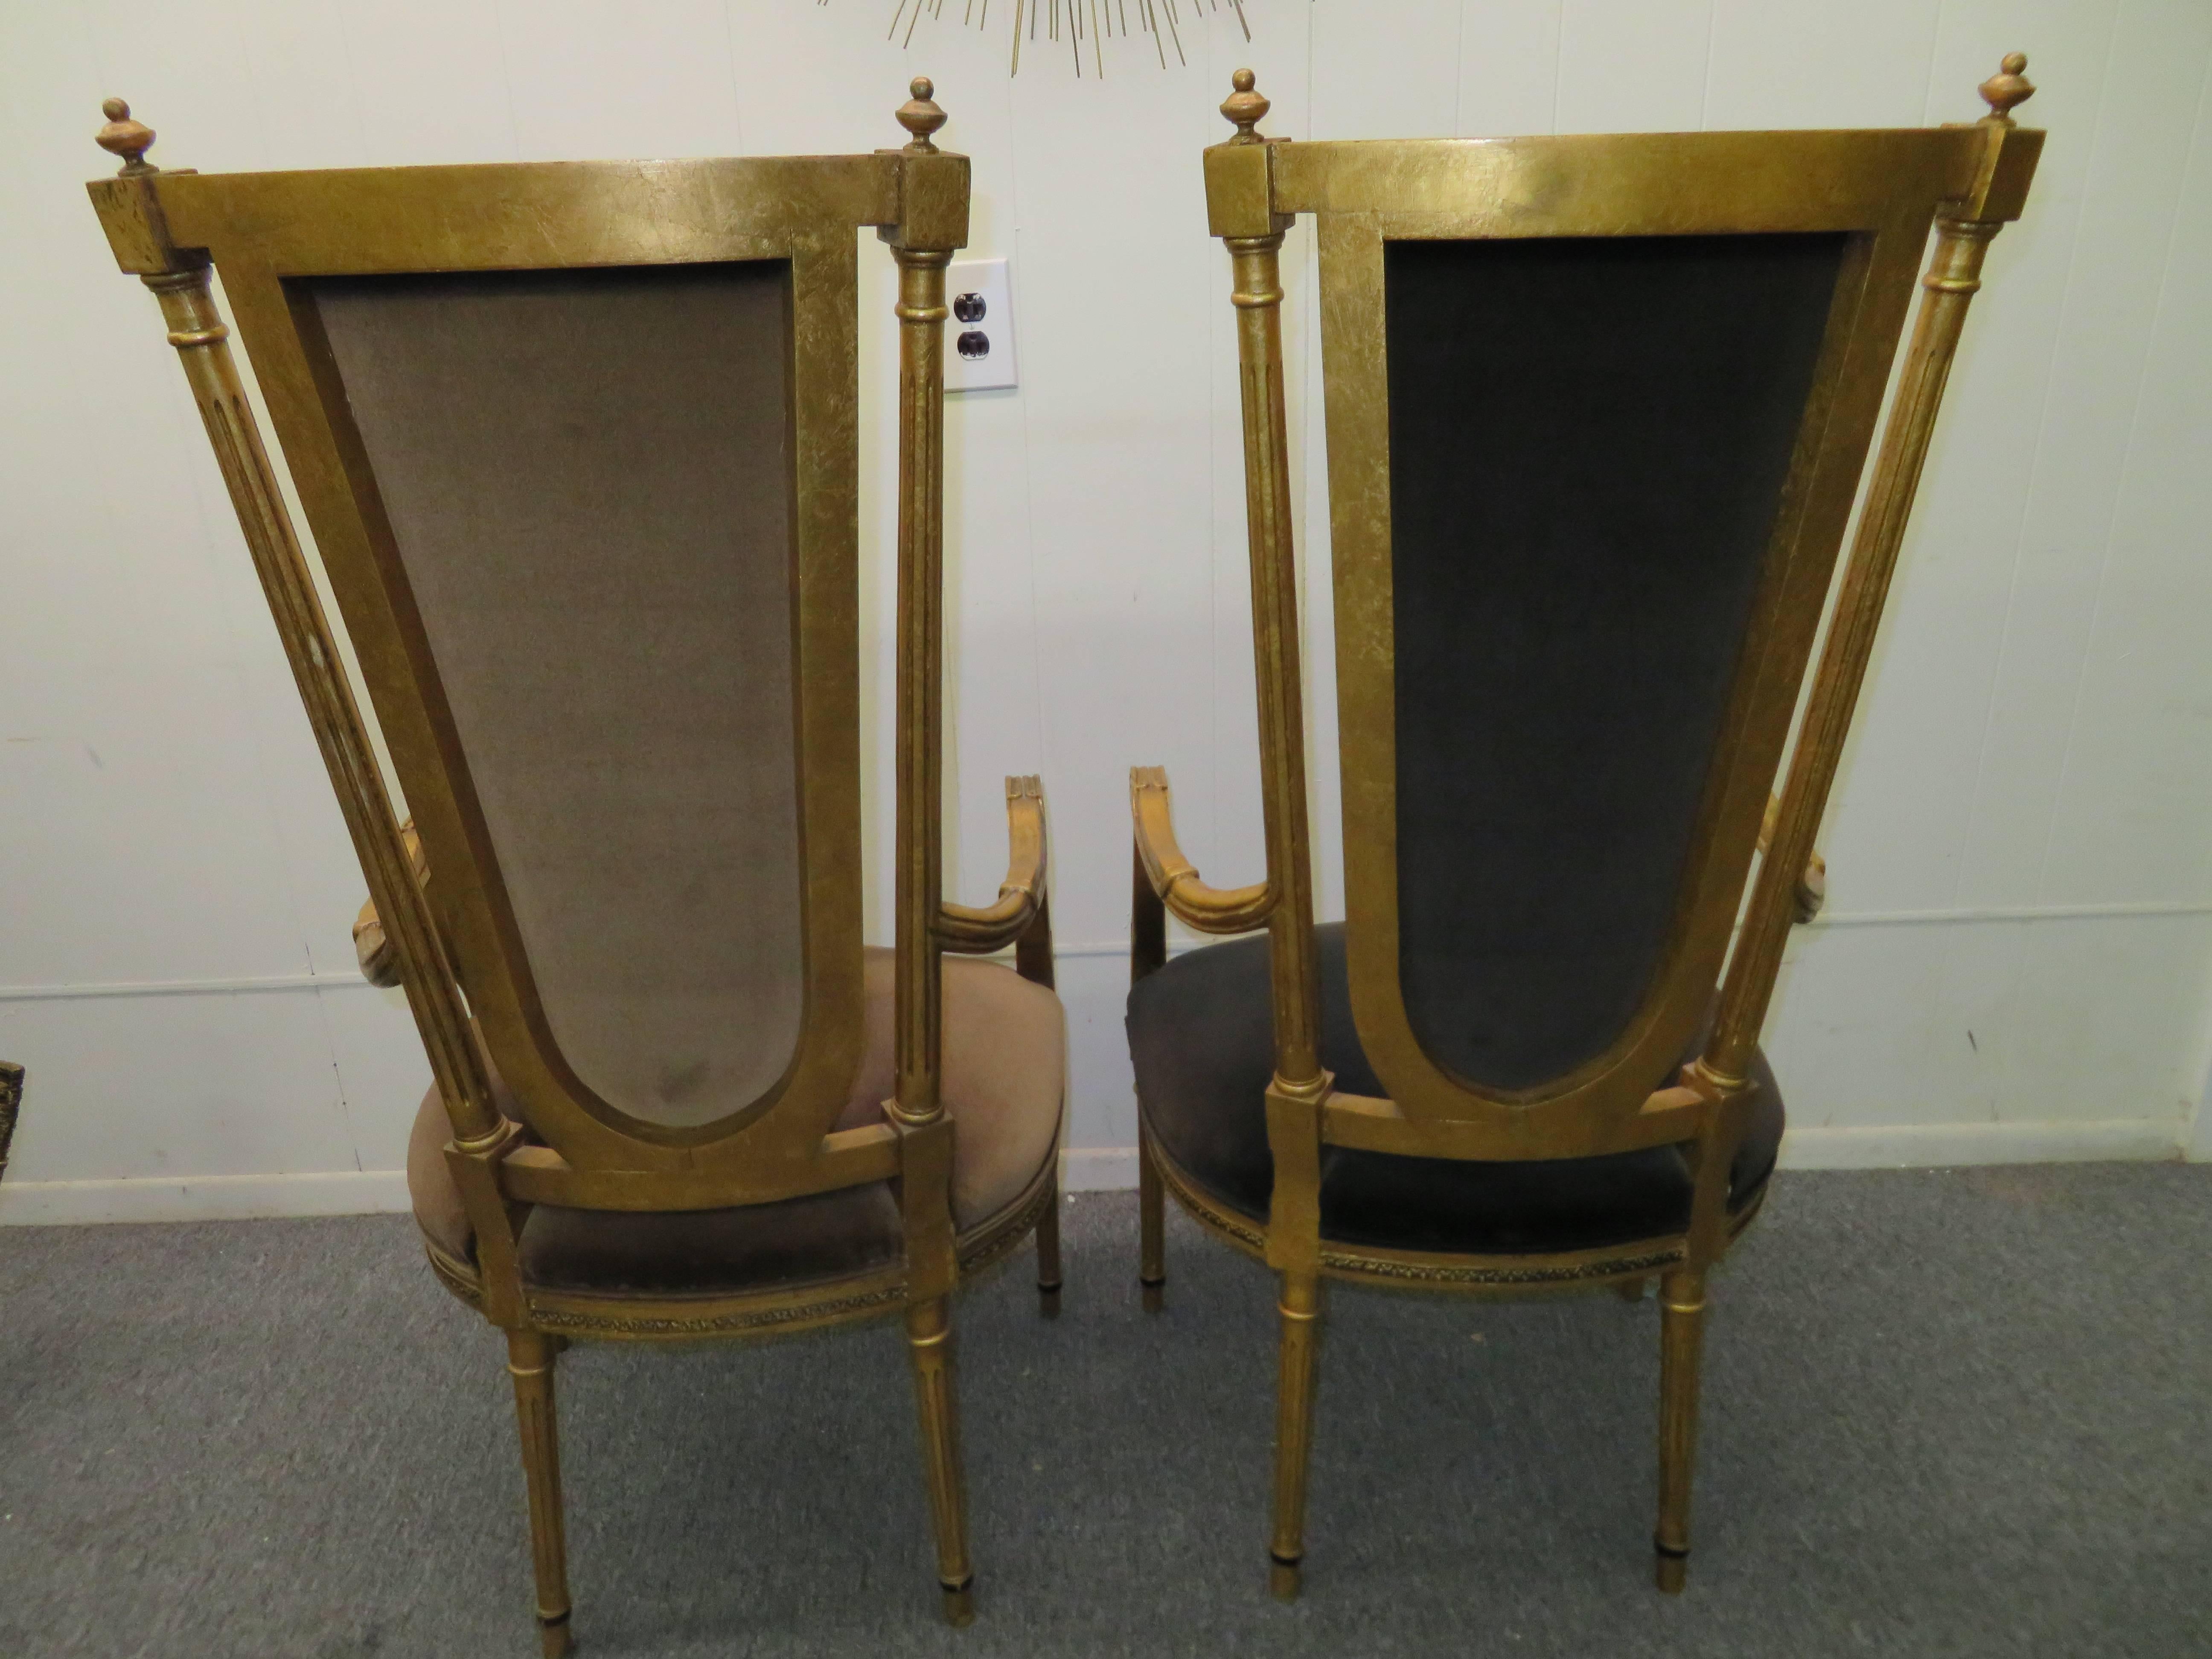 Stunning pair of Maison Jansen style Hollywood Regency neoclassical gilded gold arm chairs. When we purchased these from their original owner they were used as dining chairs at the head of the table-just gorgeous! Use them anyway you please-they